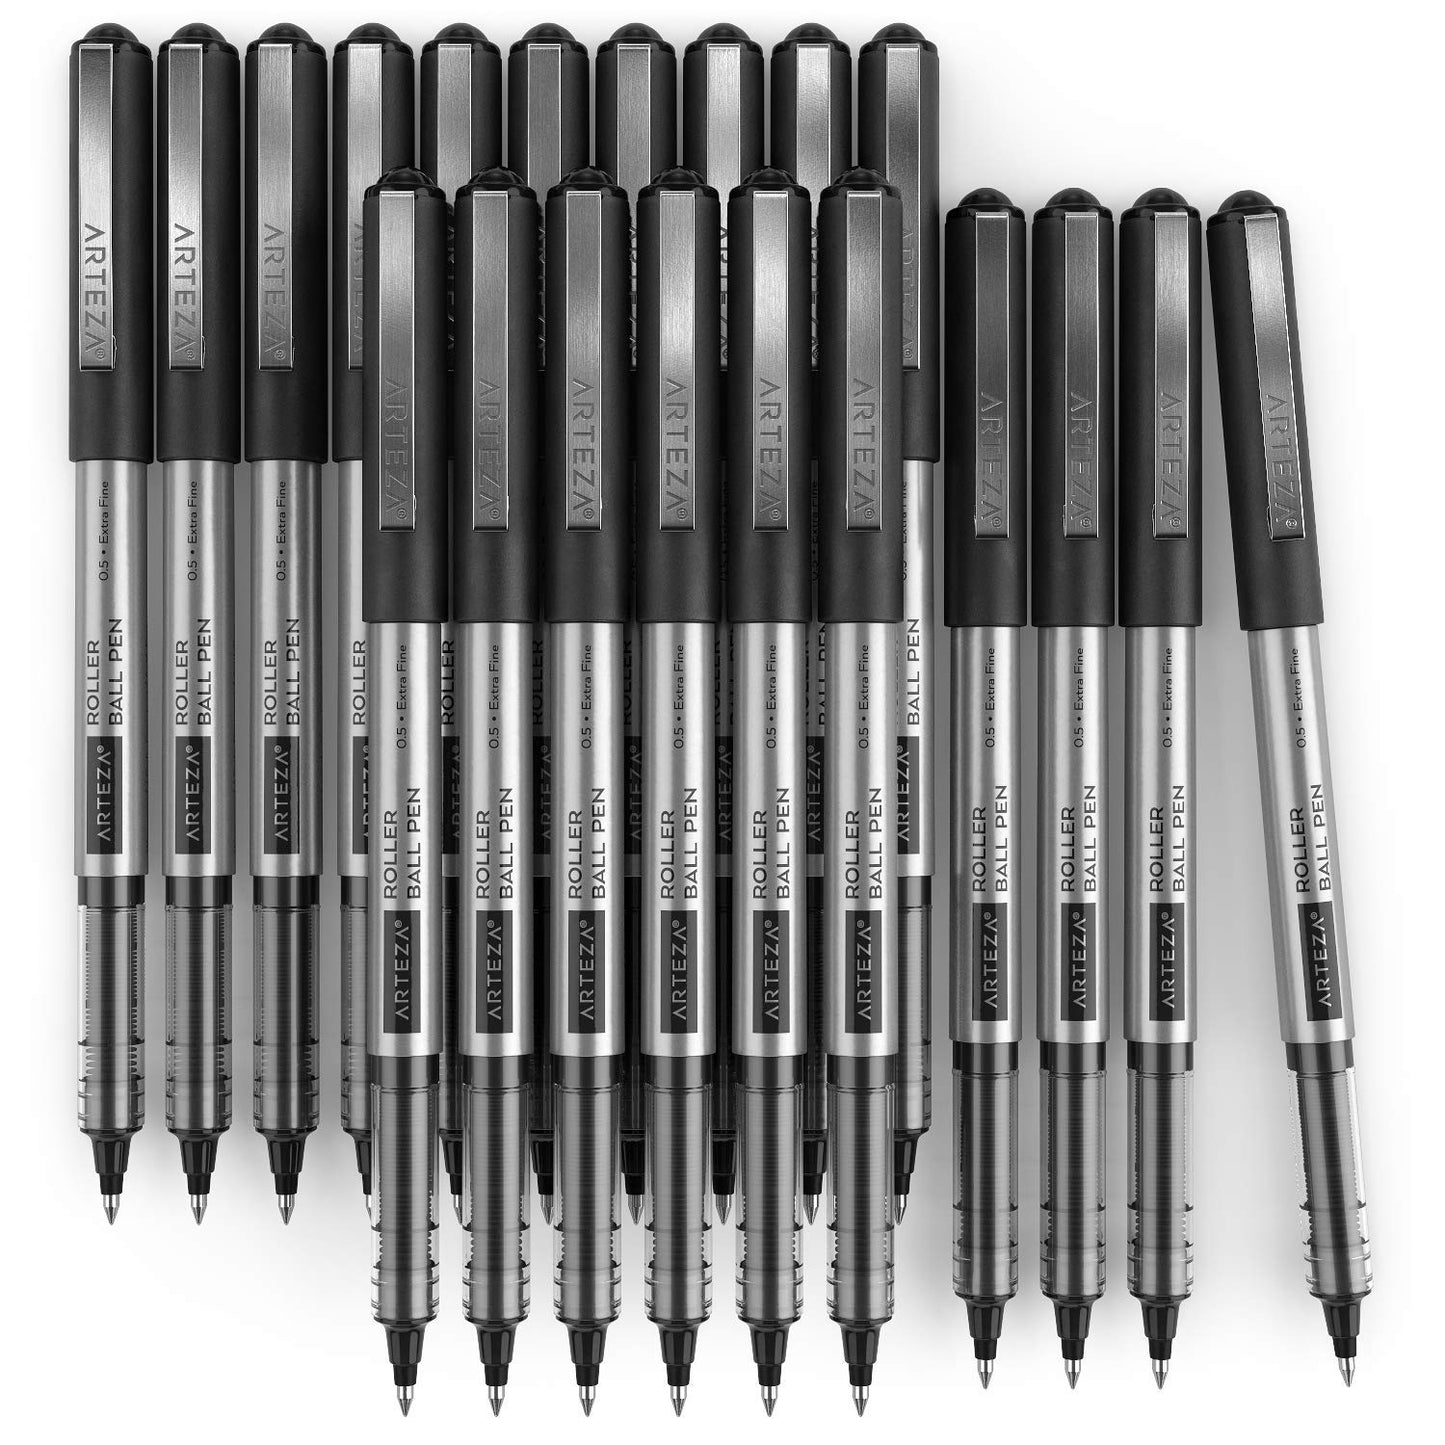 ARTEZA Rollerball Pens, Pack of 20, 0.5mm Black Liquid Ink Pens for Bullet Journaling, Fine Point Rollerball, Office Supplies for Writing, Taking